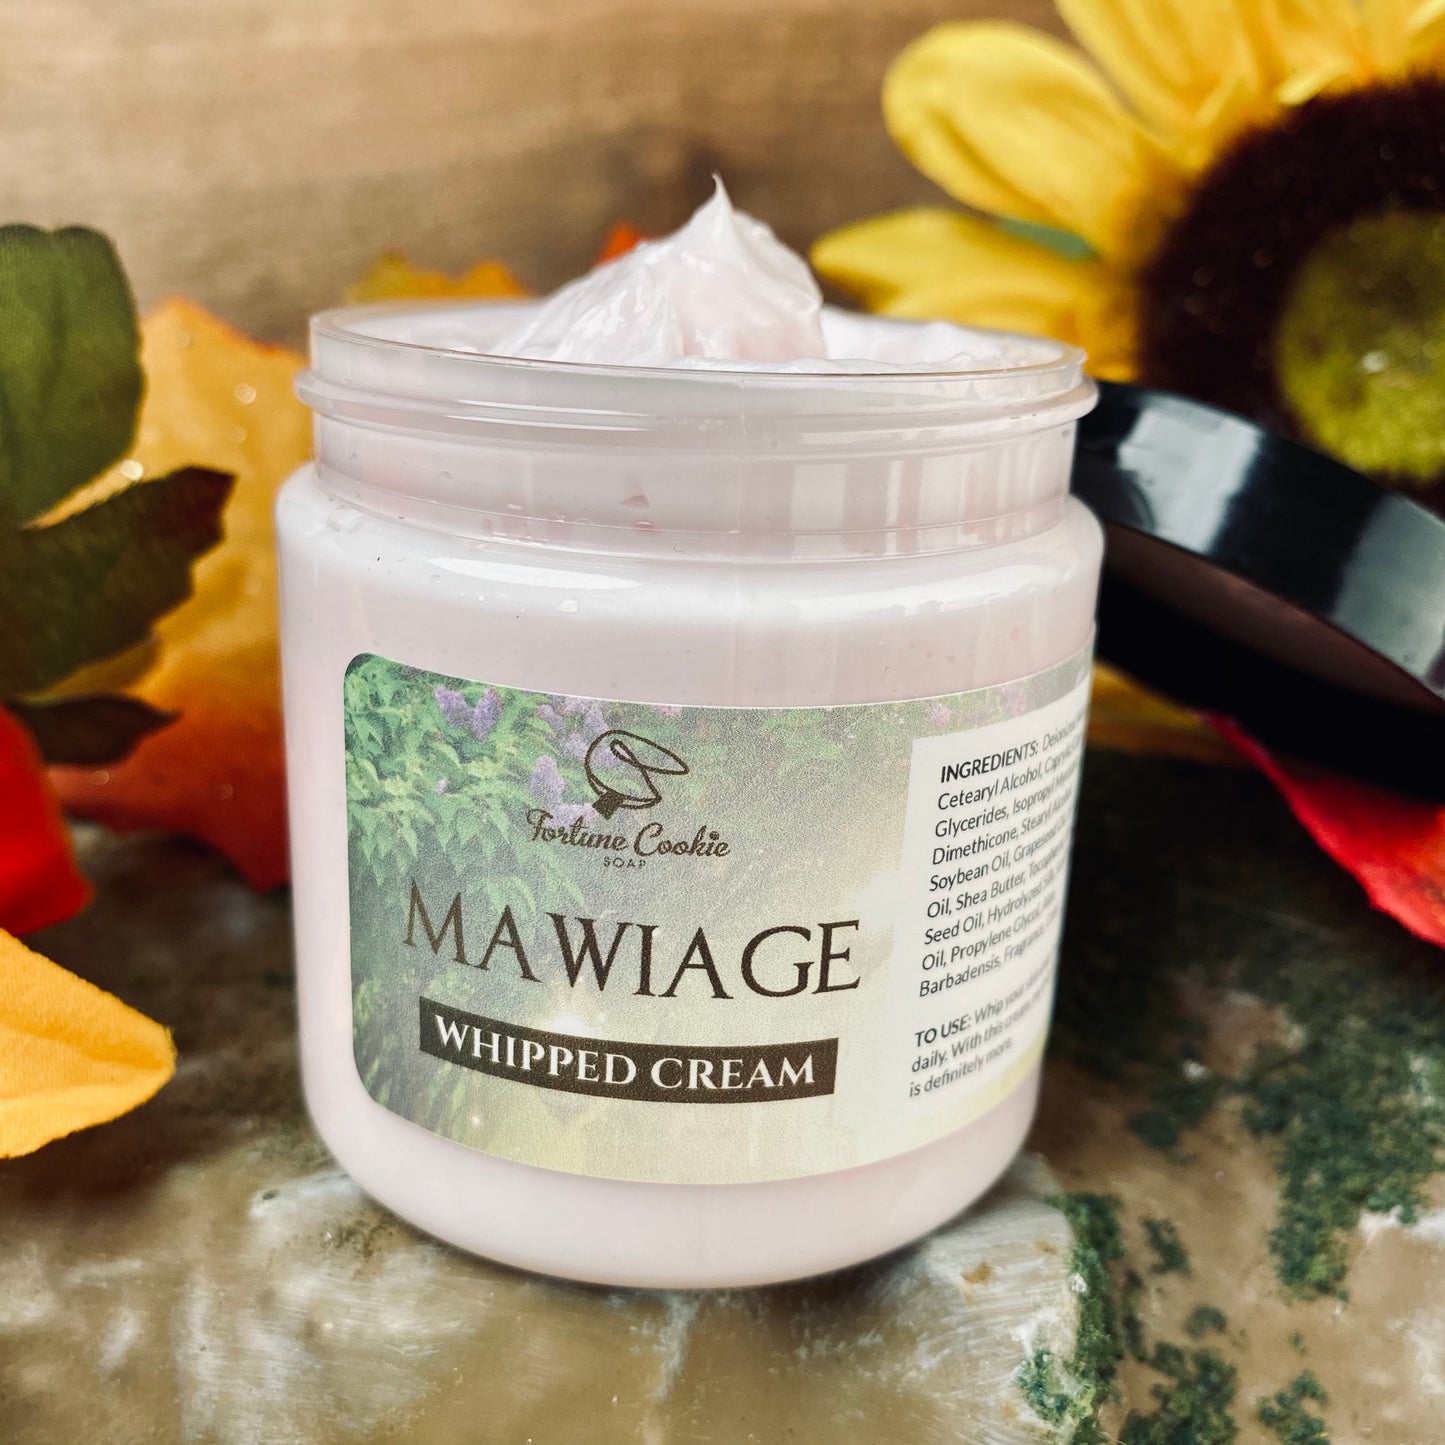 MAWIAGE Whipped Cream